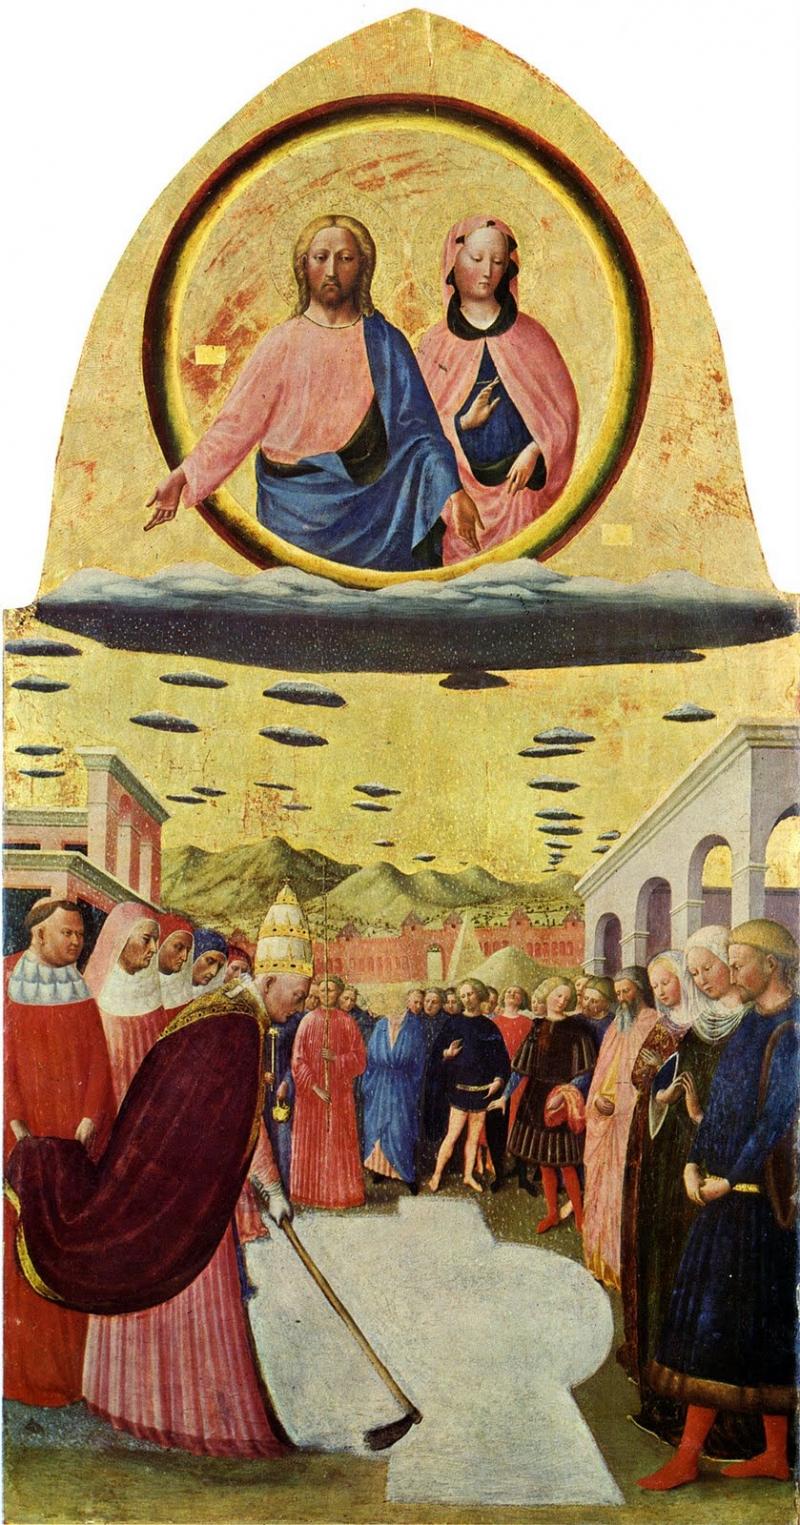 The Miracle of the Snow by Masolino da Panicale